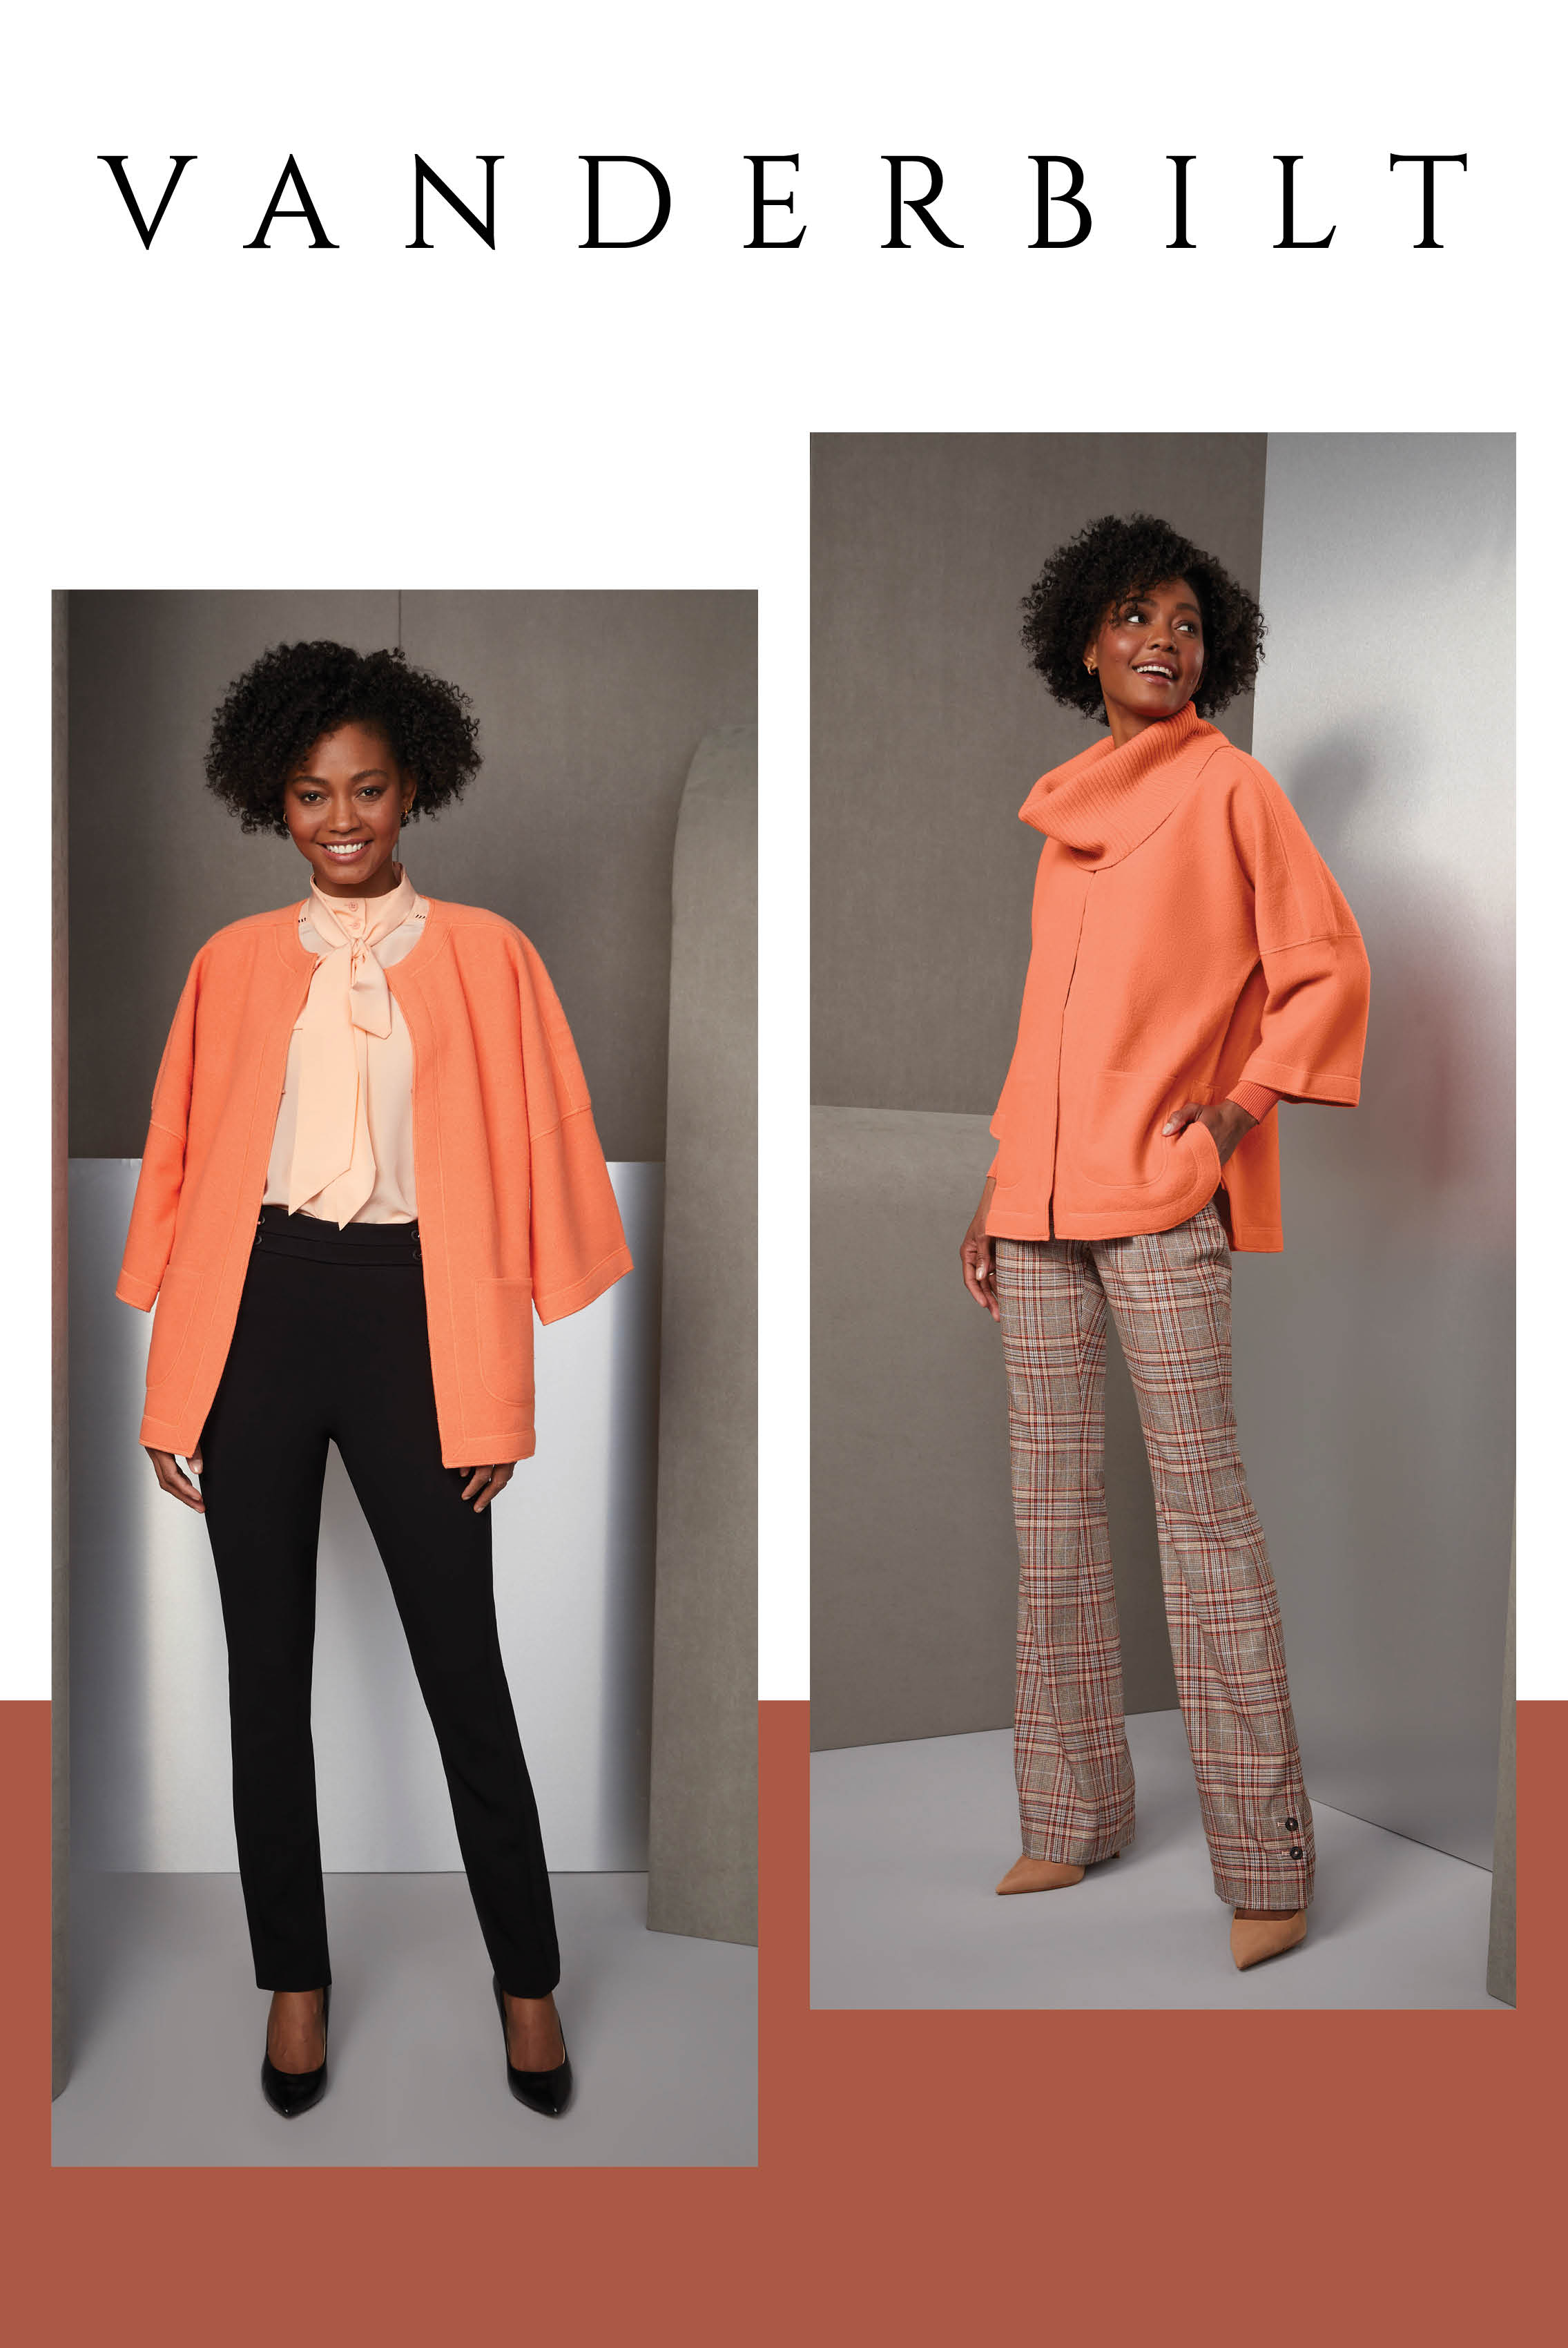 Indulge in rich fall colors. The boiled merino swing jacket is a rich bold apricot. That color is also found in the Italian plaid pants, along with bright peach and chocolate torte. 